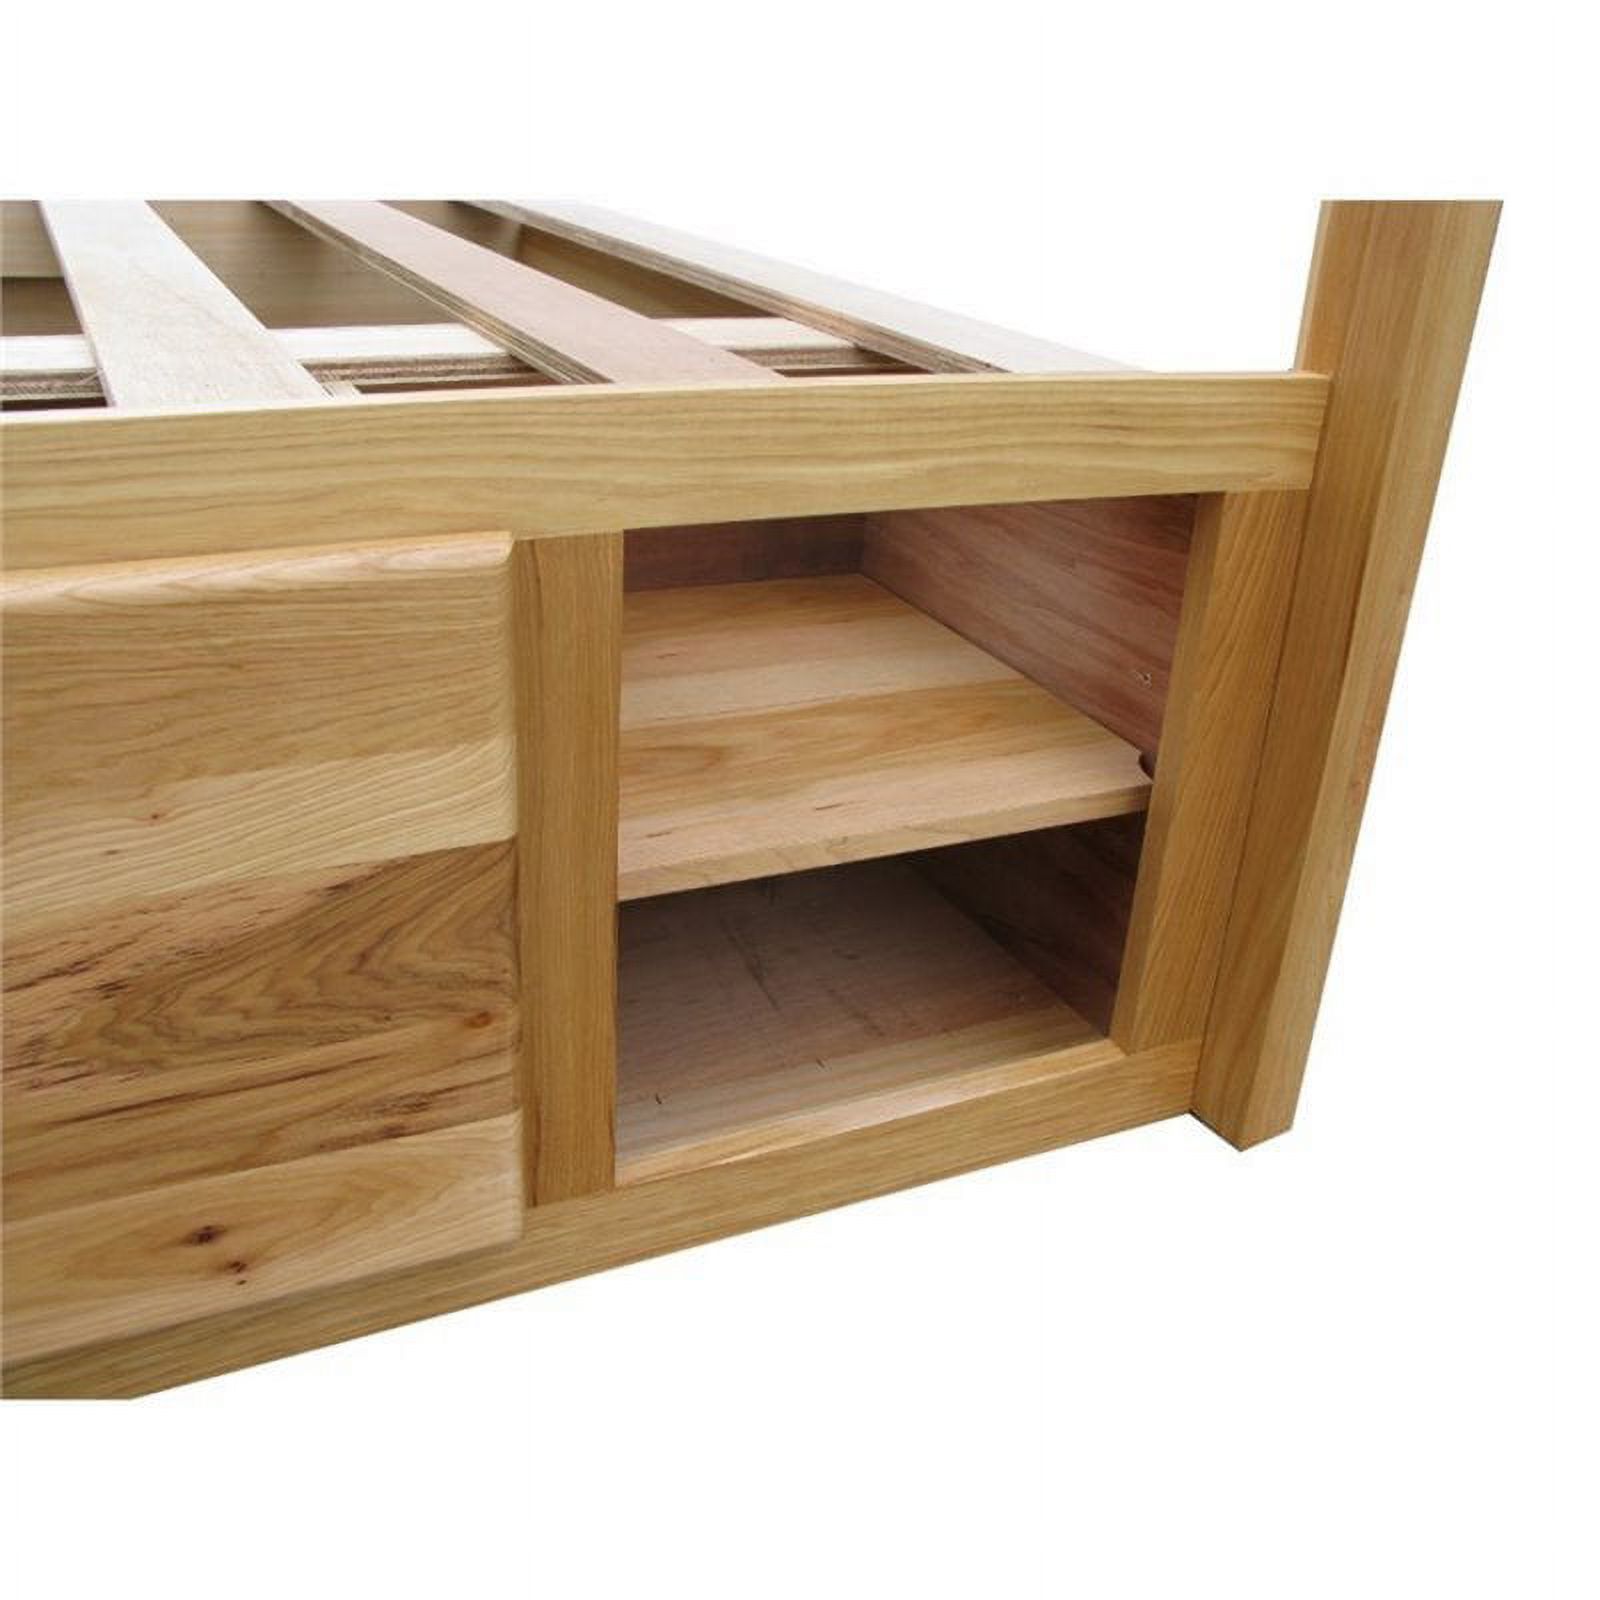 A-America Adamstown Queen Storage Bed in Natural - image 3 of 4